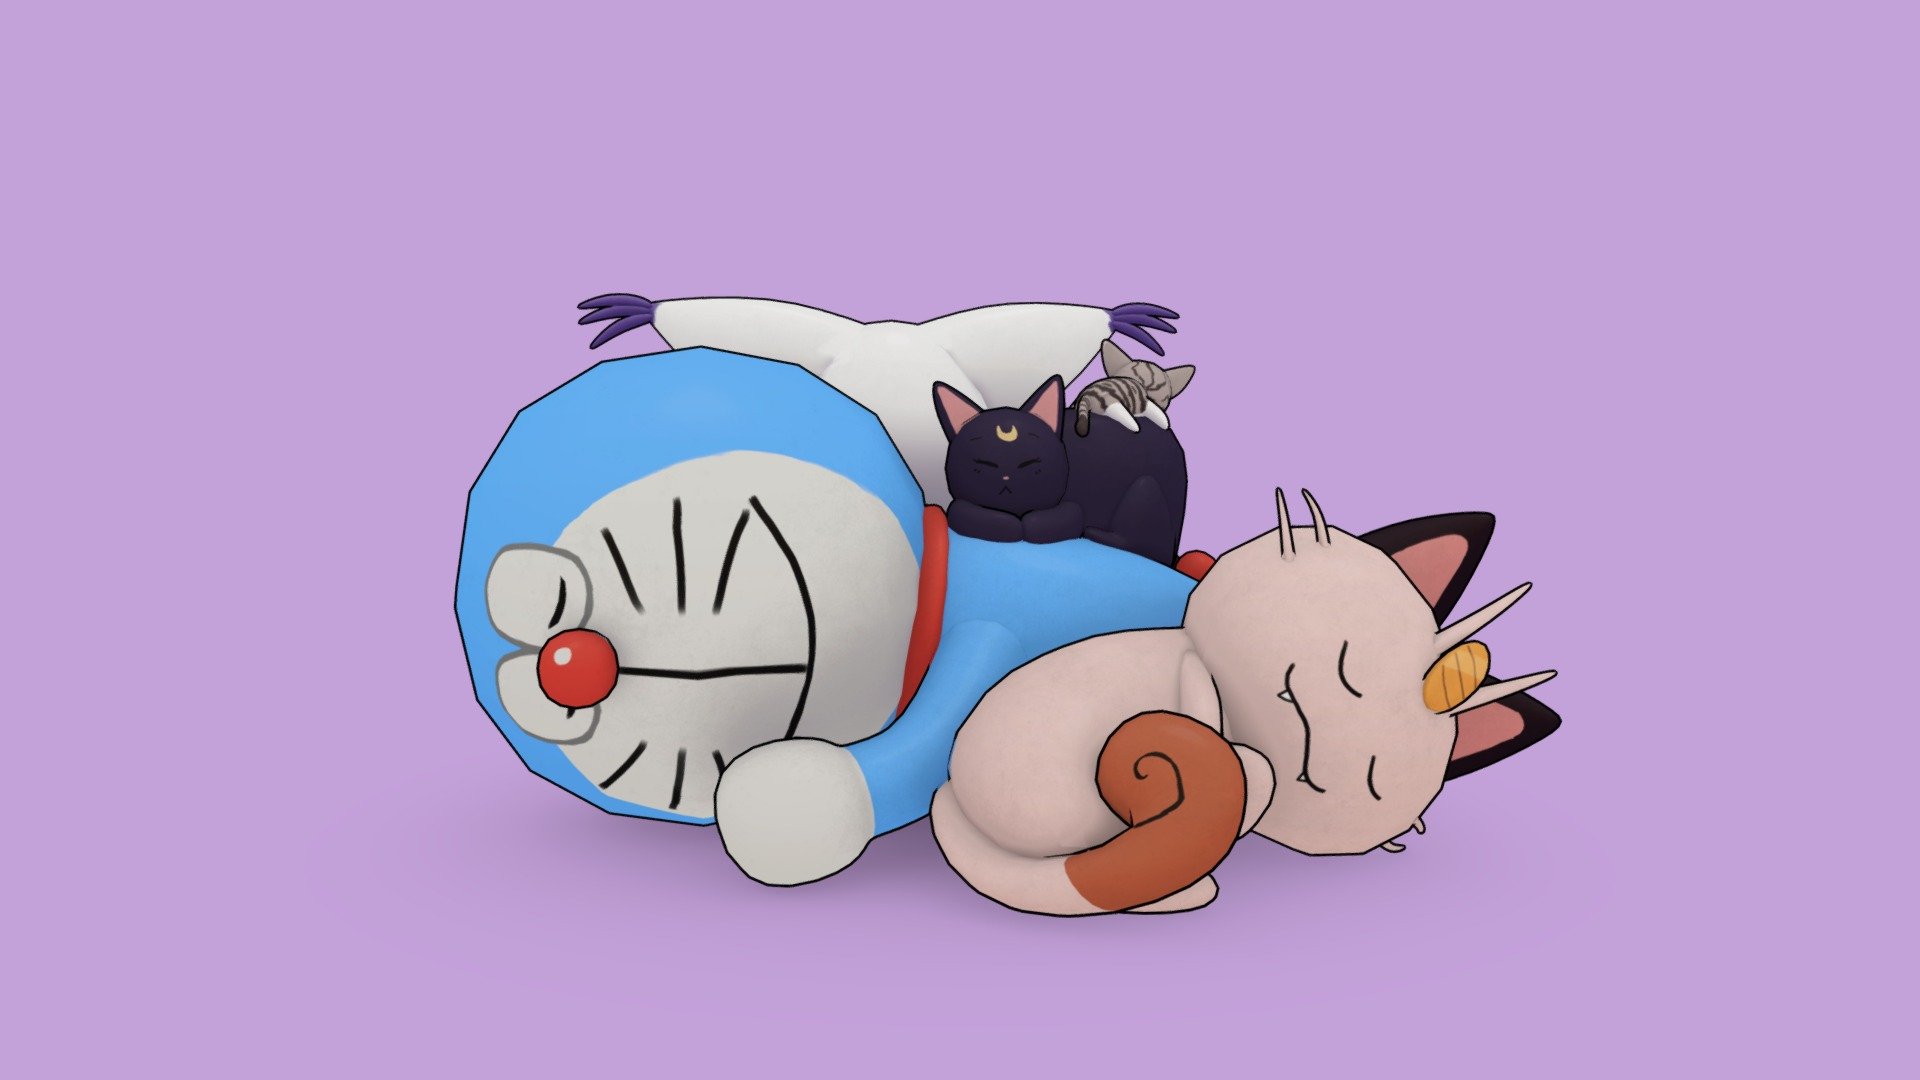 A mashup of some of my favorite anime cats napping!

Cats featured:
- Doraemon from Doraemon
- Luna from Sailor Moon
- Chi from Chi's Sweet Home
- Meowth from Pokémon
- Gatomon from Digimon
- Jiji from Kiki's Delivery Service

Youtube Speedmodel: https://youtu.be/iVLhOHRhsB8 - Anime Kitty Nap! - 3D model by Ines Pereira (@inesp_3d) 3d model